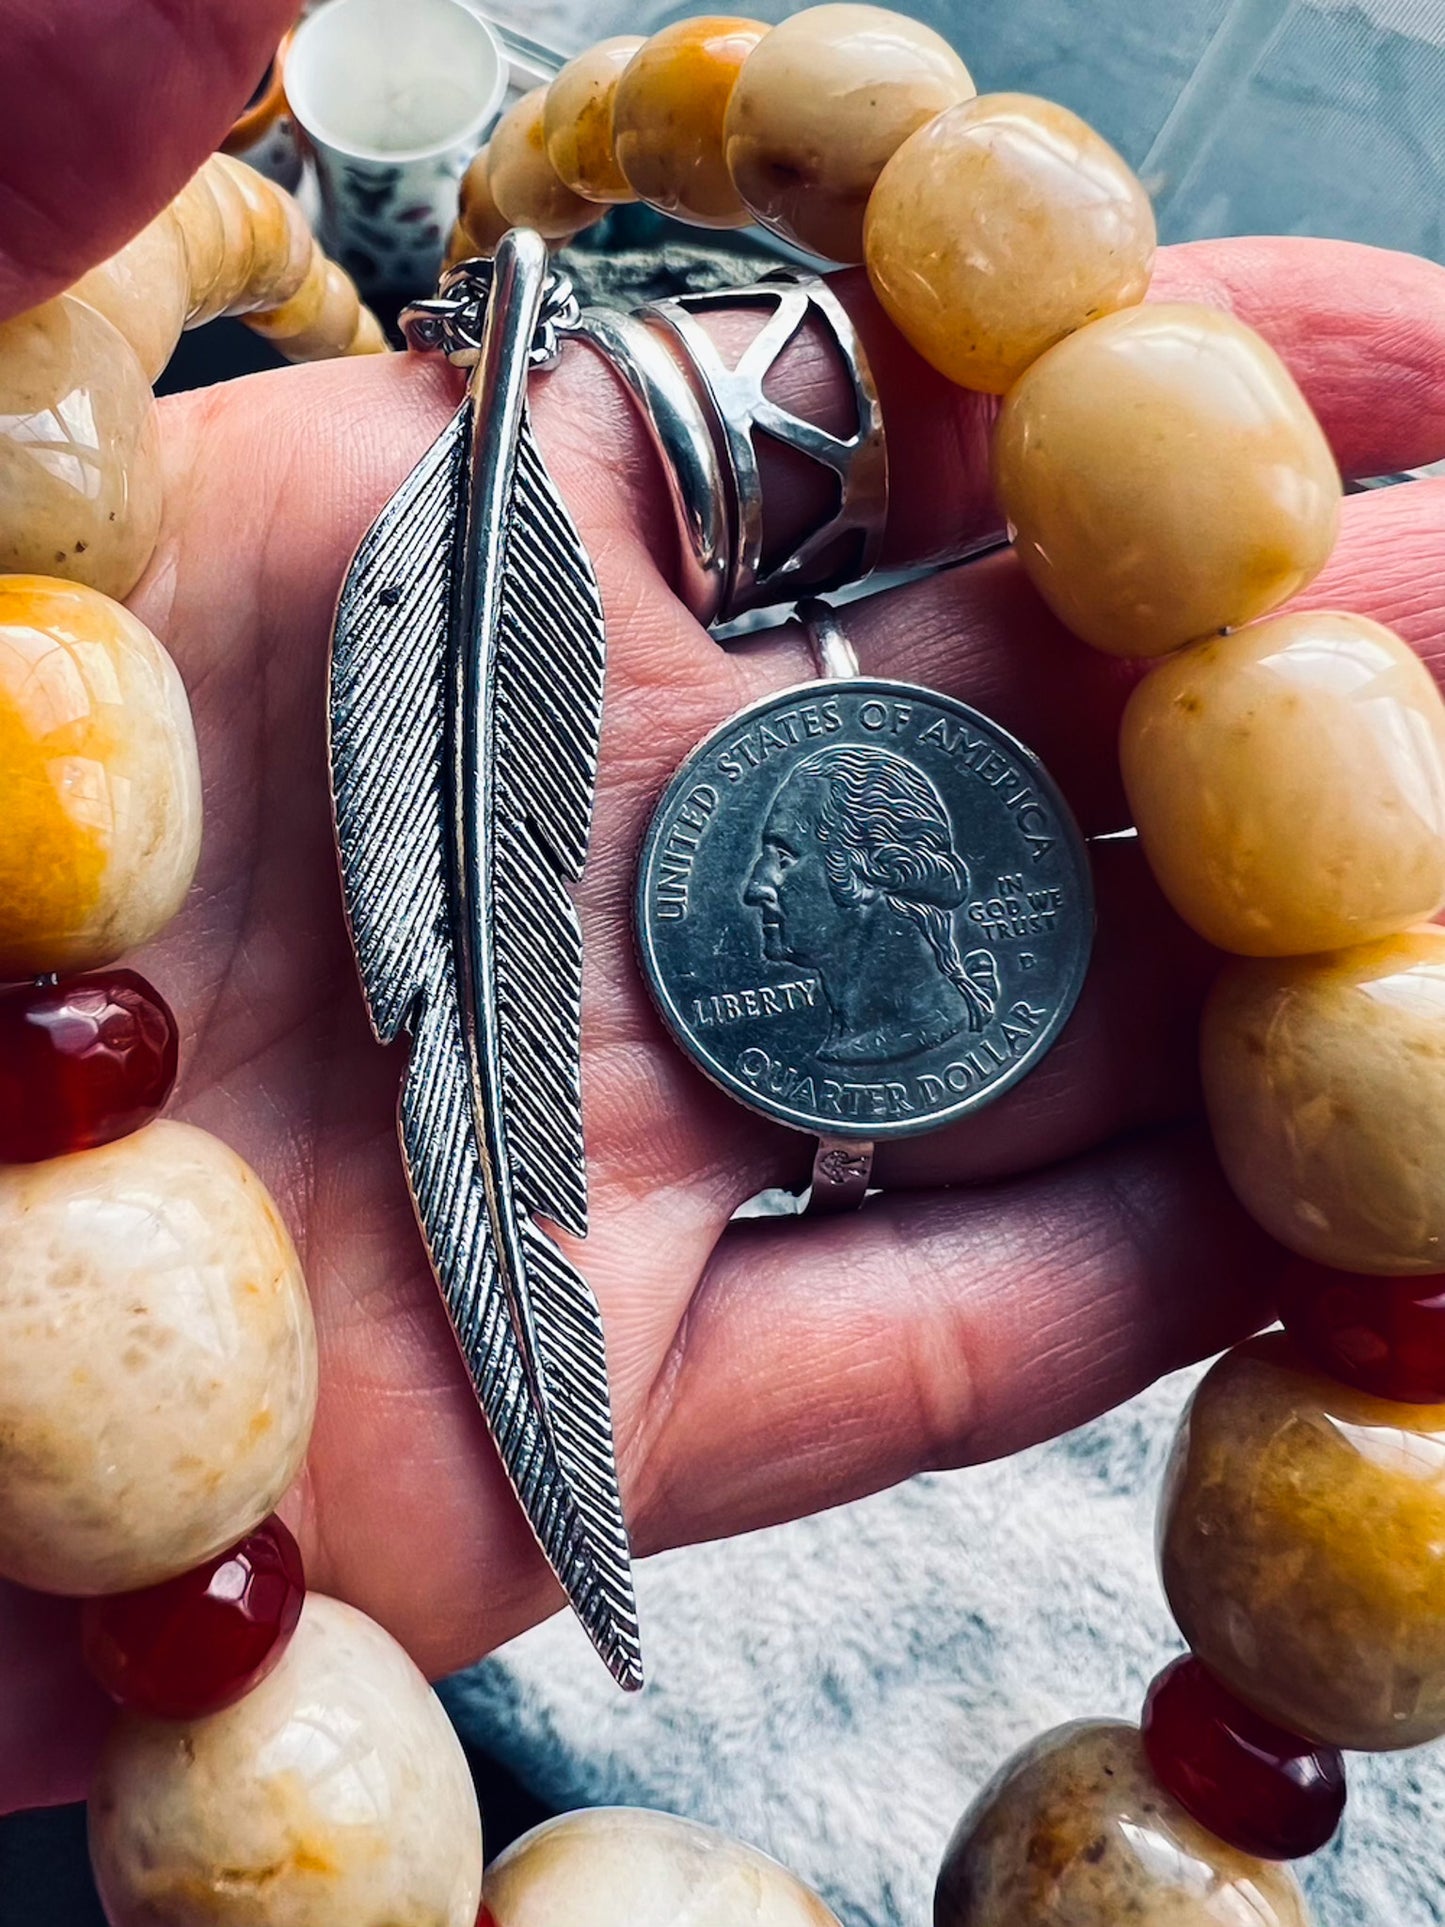 'Life is Sweet' Graduated Honey Jade, Carnelian Rhondelles & Giant Feather Pendant Stainless Steel LayerNecklace